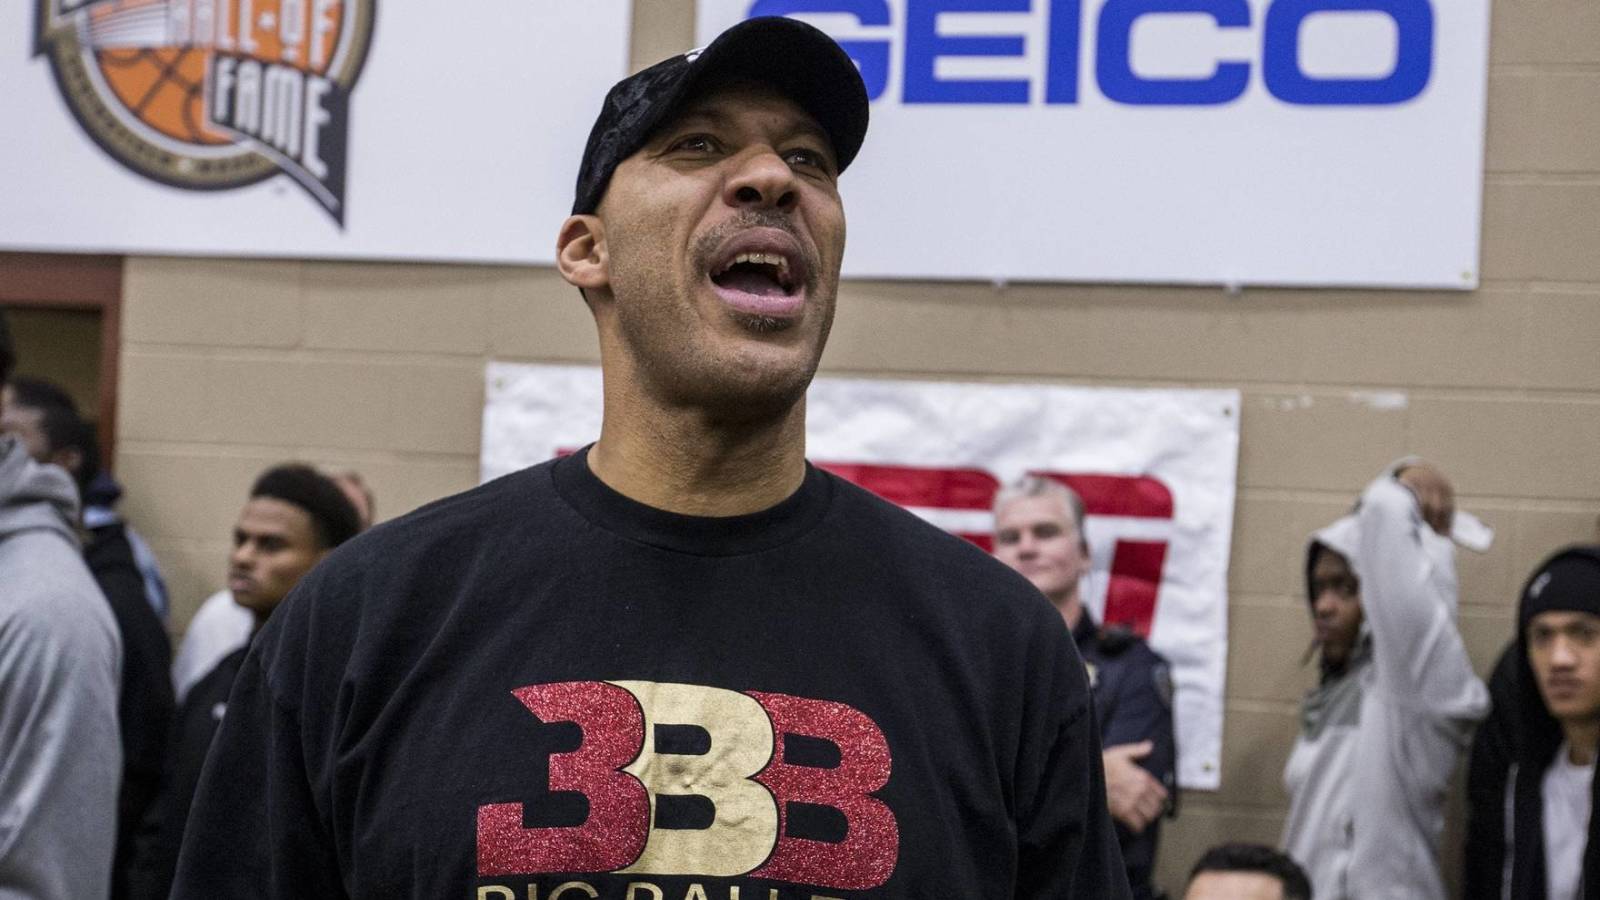 LaVar Ball hints at desire to be an NBA coach, claims that all three sons will play together someday